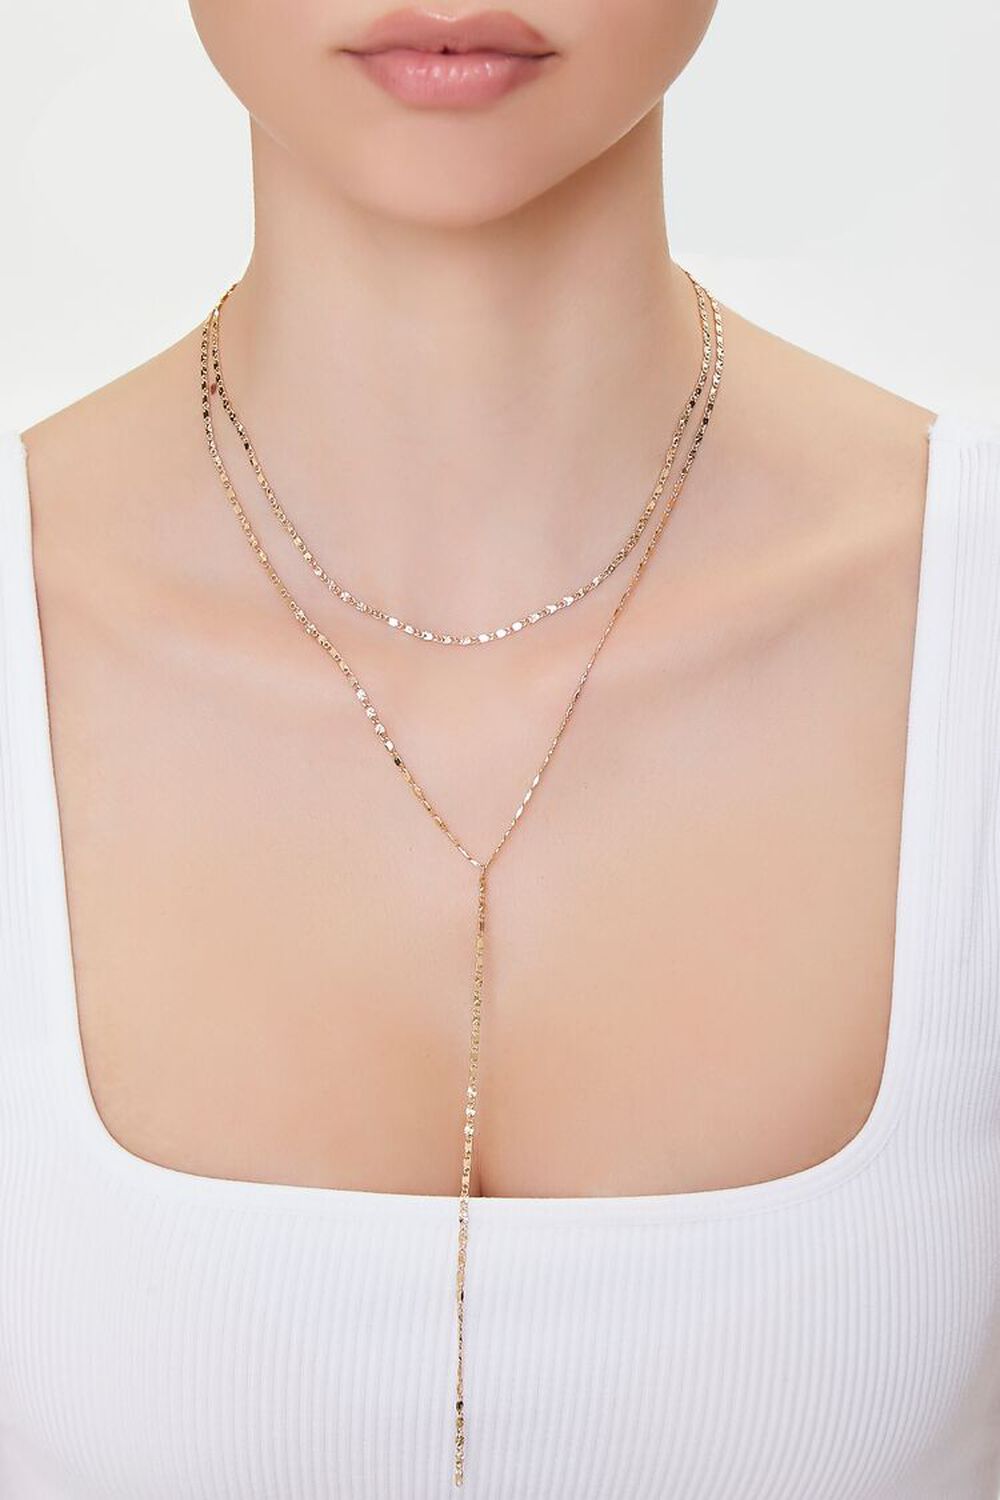 Y-Chain Layered Chain Necklace, image 1